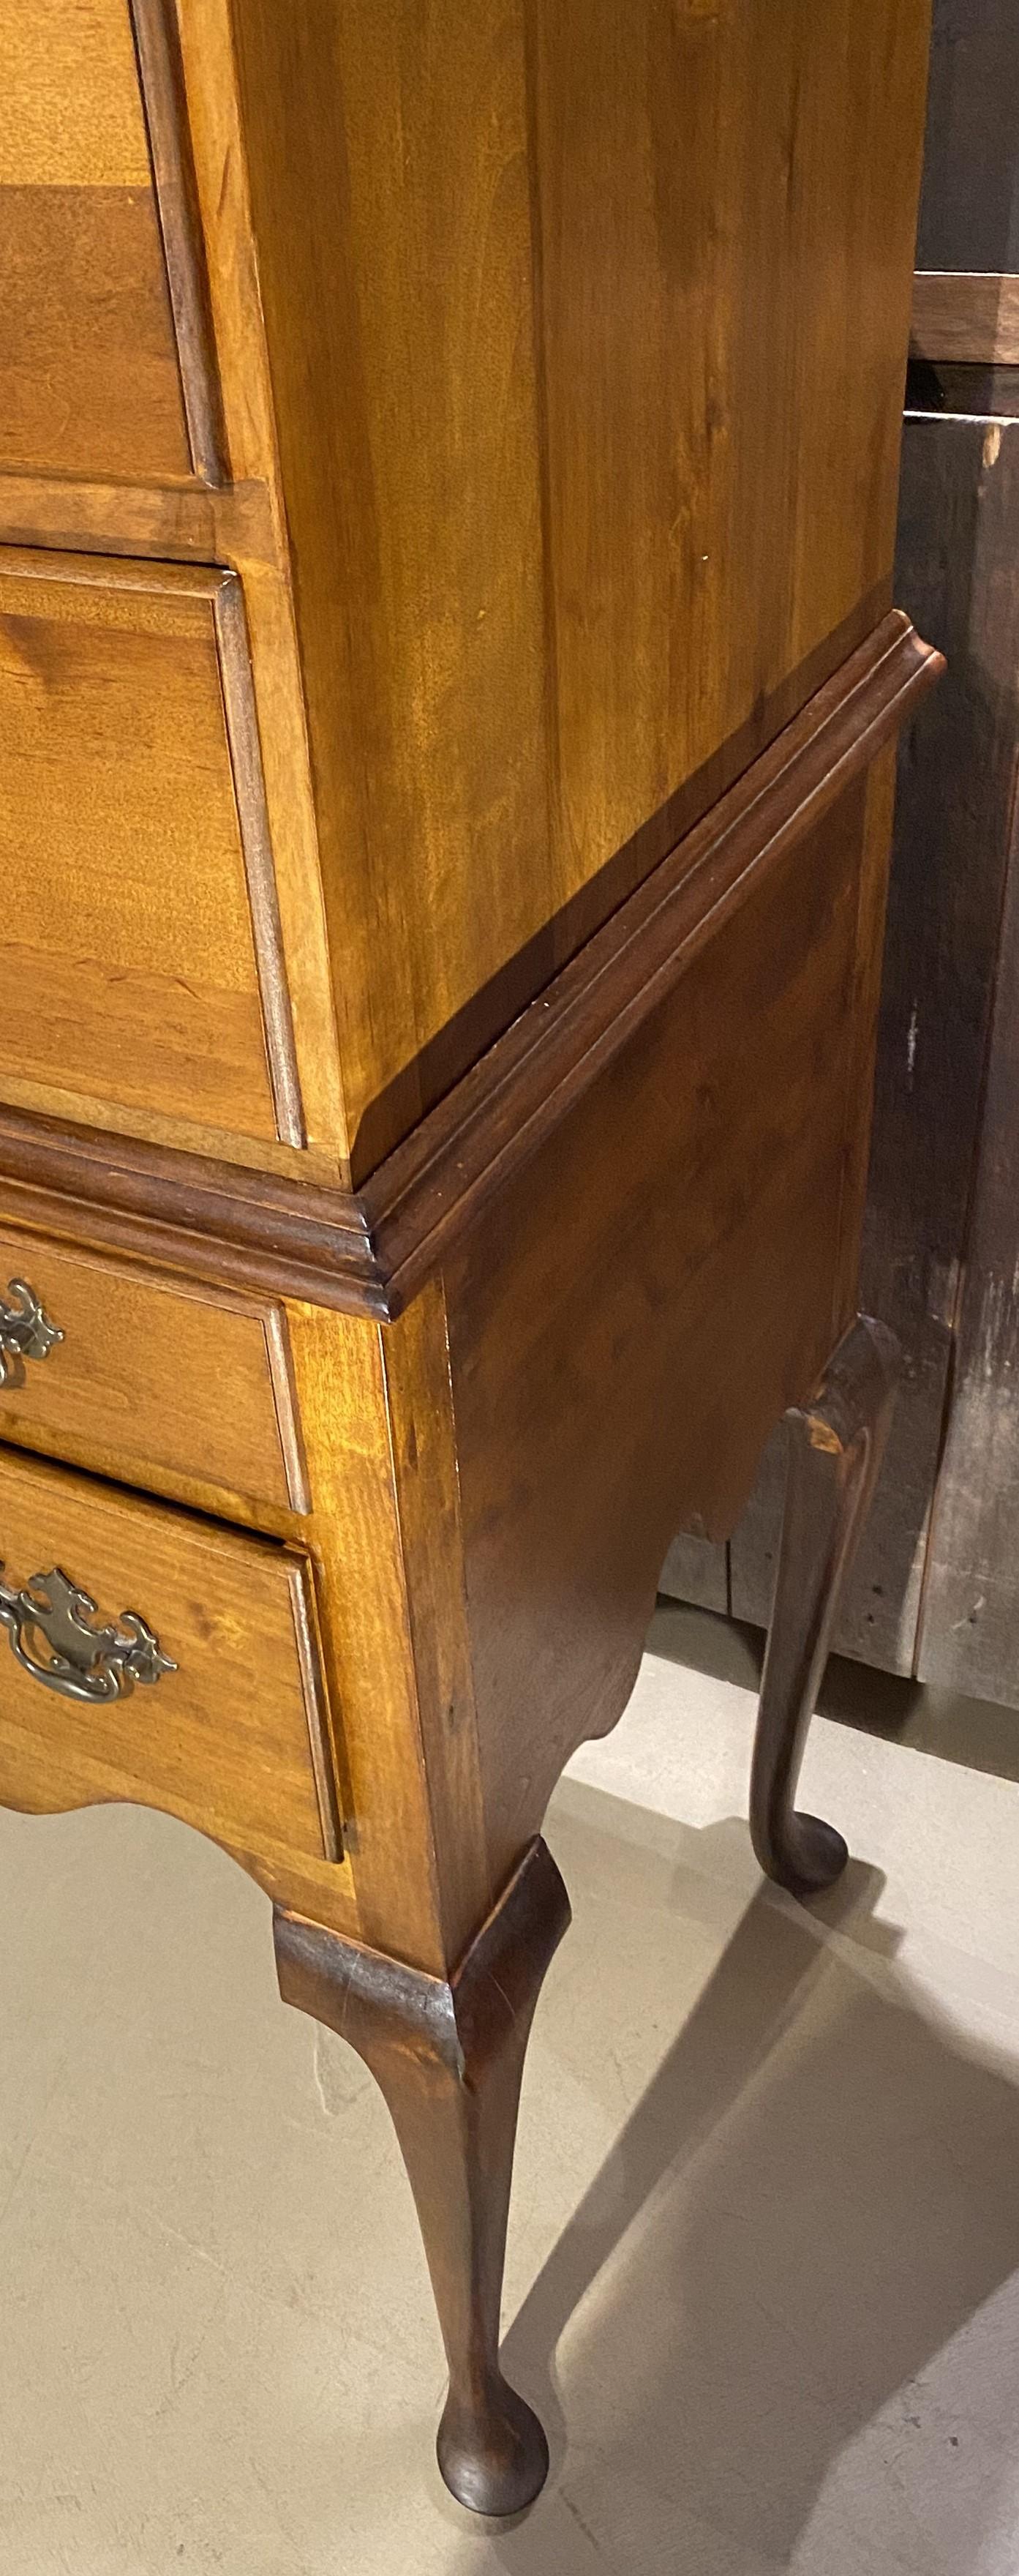 Bonnet Top Highboy with Pinwheel Carvings & Impressive Size In Good Condition For Sale In Milford, NH